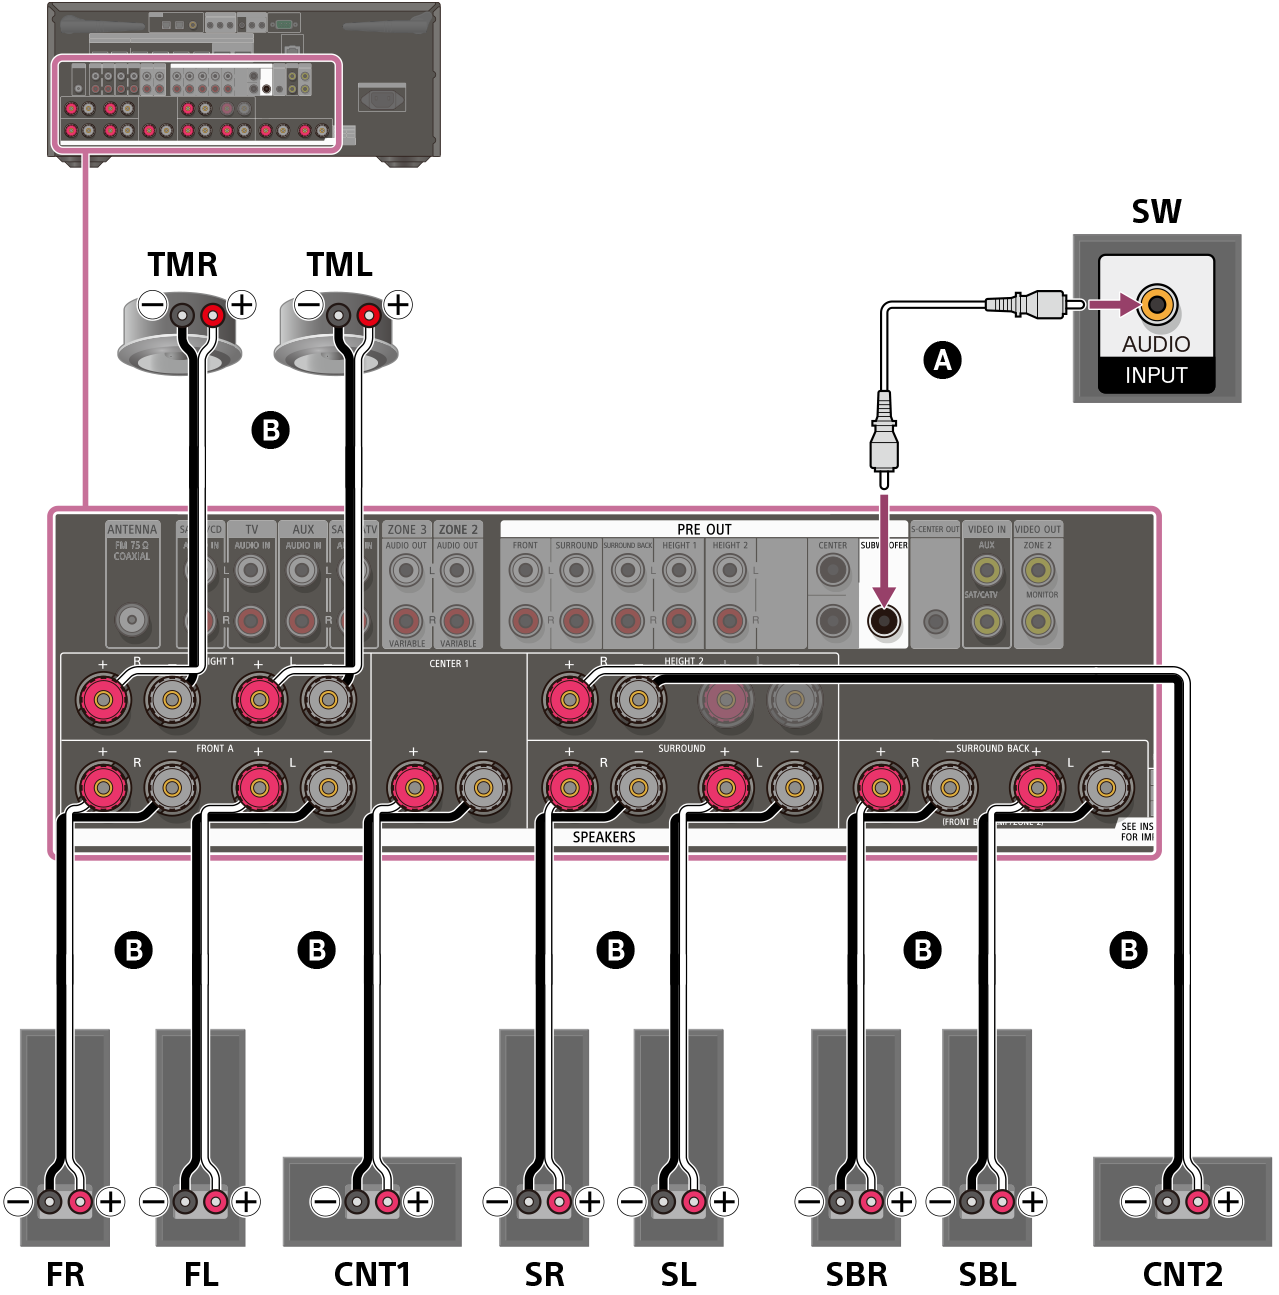 Illustration of connecting each speaker to the speaker terminals on the rear of the receiver. Connect the left and right front speakers, left and right surround speakers, center speaker (CNT1), center speaker (CNT2), left and right surround back speakers, and left and right top middle speakers to their respective speaker terminals using speaker cables (not supplied). Connect the subwoofer to the SUBWOOFER OUT terminal with a monaural audio cable (not supplied).